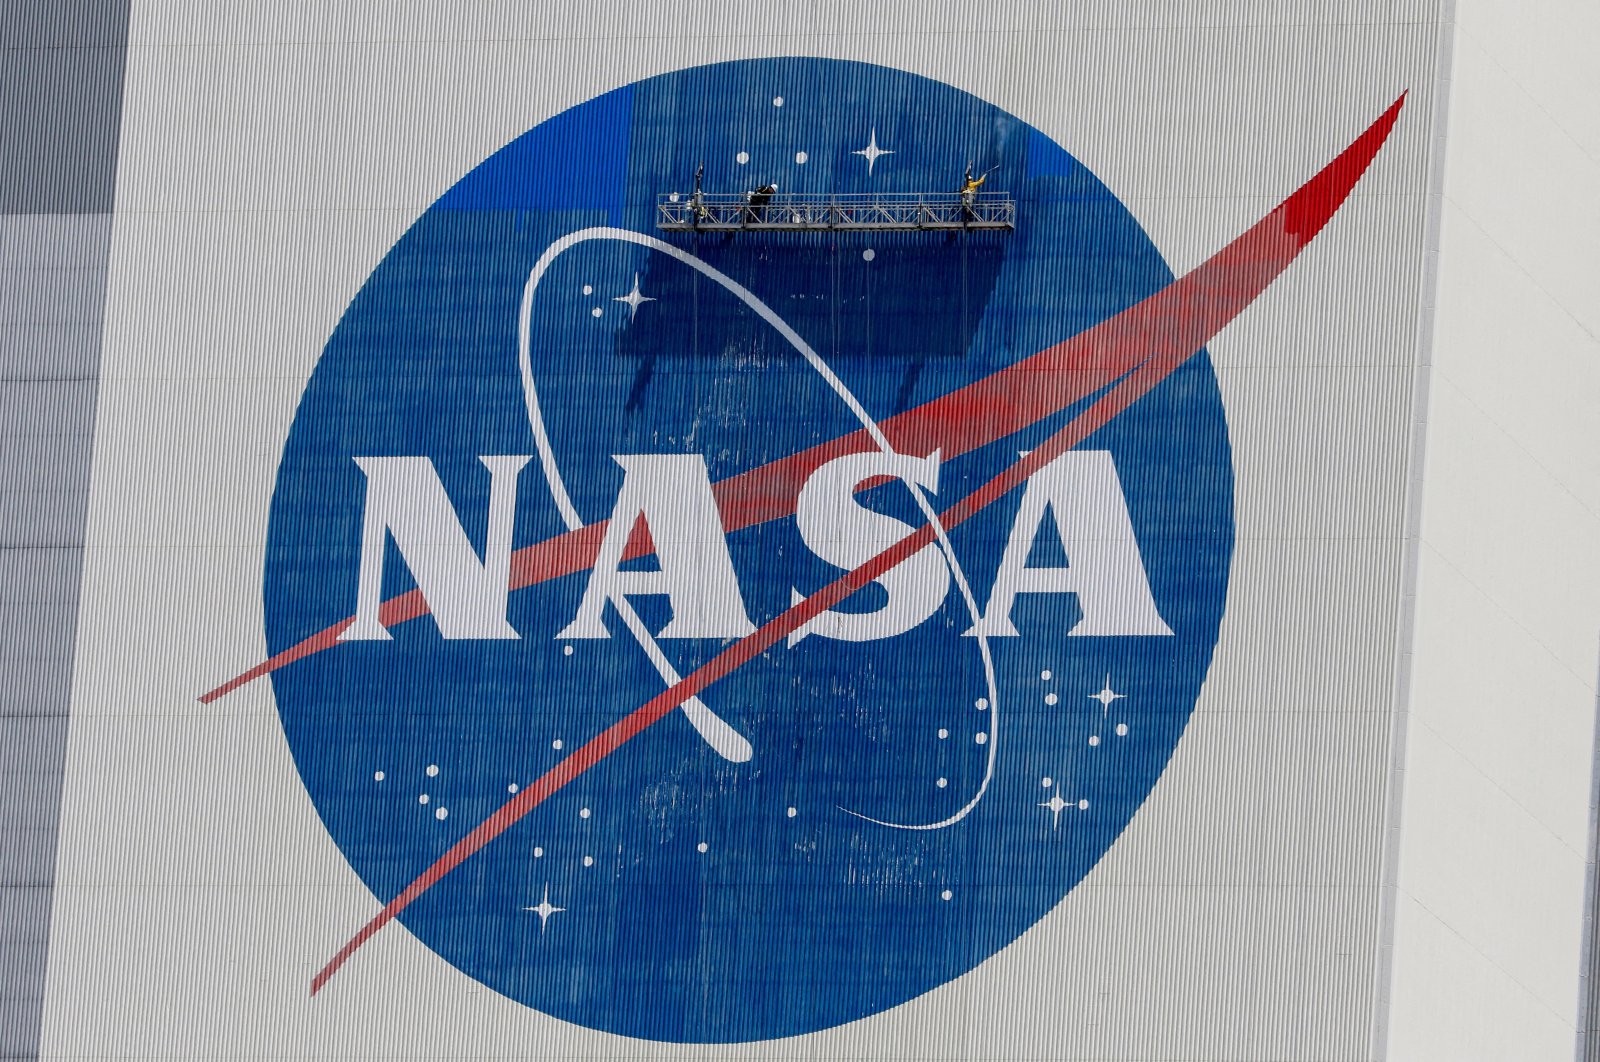 Workers pressure wash the logo of NASA on the Vehicle Assembly Building before SpaceX will send two NASA astronauts to the International Space Station aboard its Falcon 9 rocket, at the Kennedy Space Center in Cape Canaveral, Florida, U.S., May 19, 2020. (Reuters File Photo)